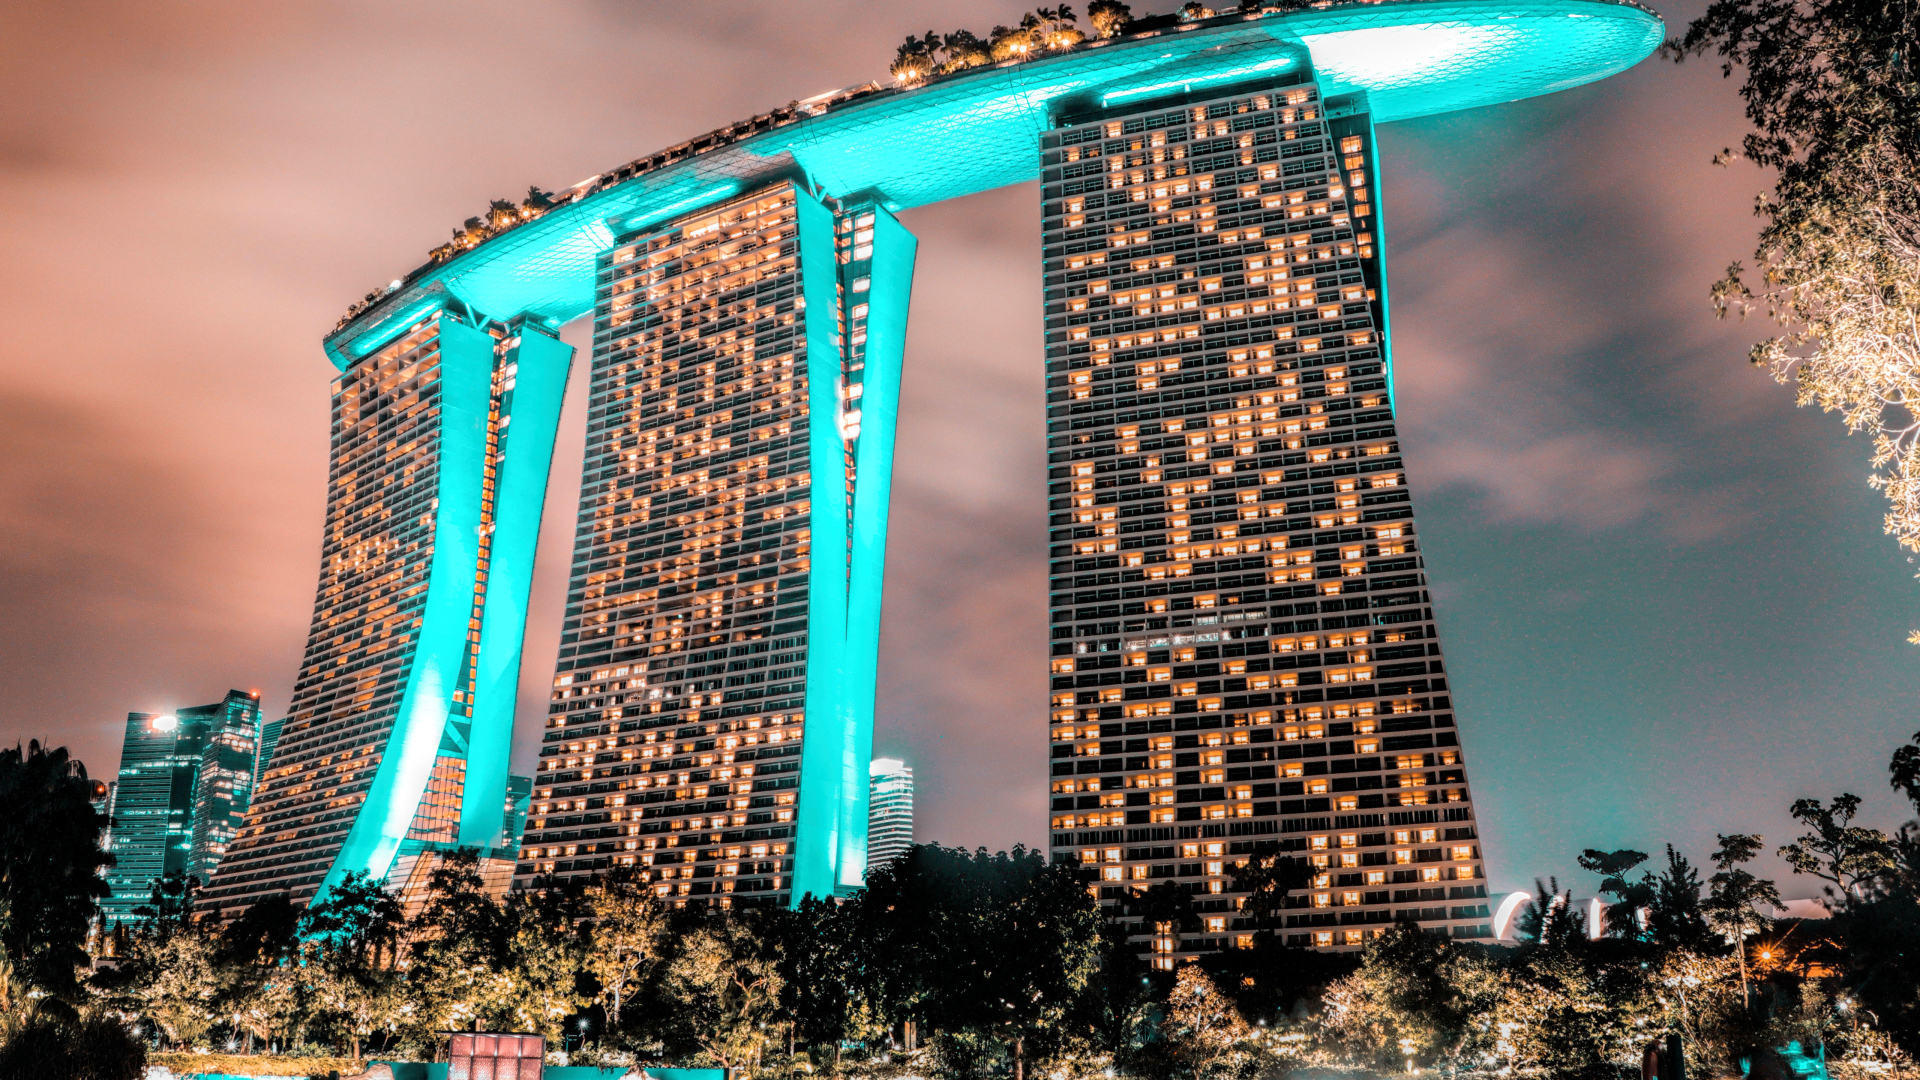 Marina Bay Sands Hotel in the evening, Singapore. Asia